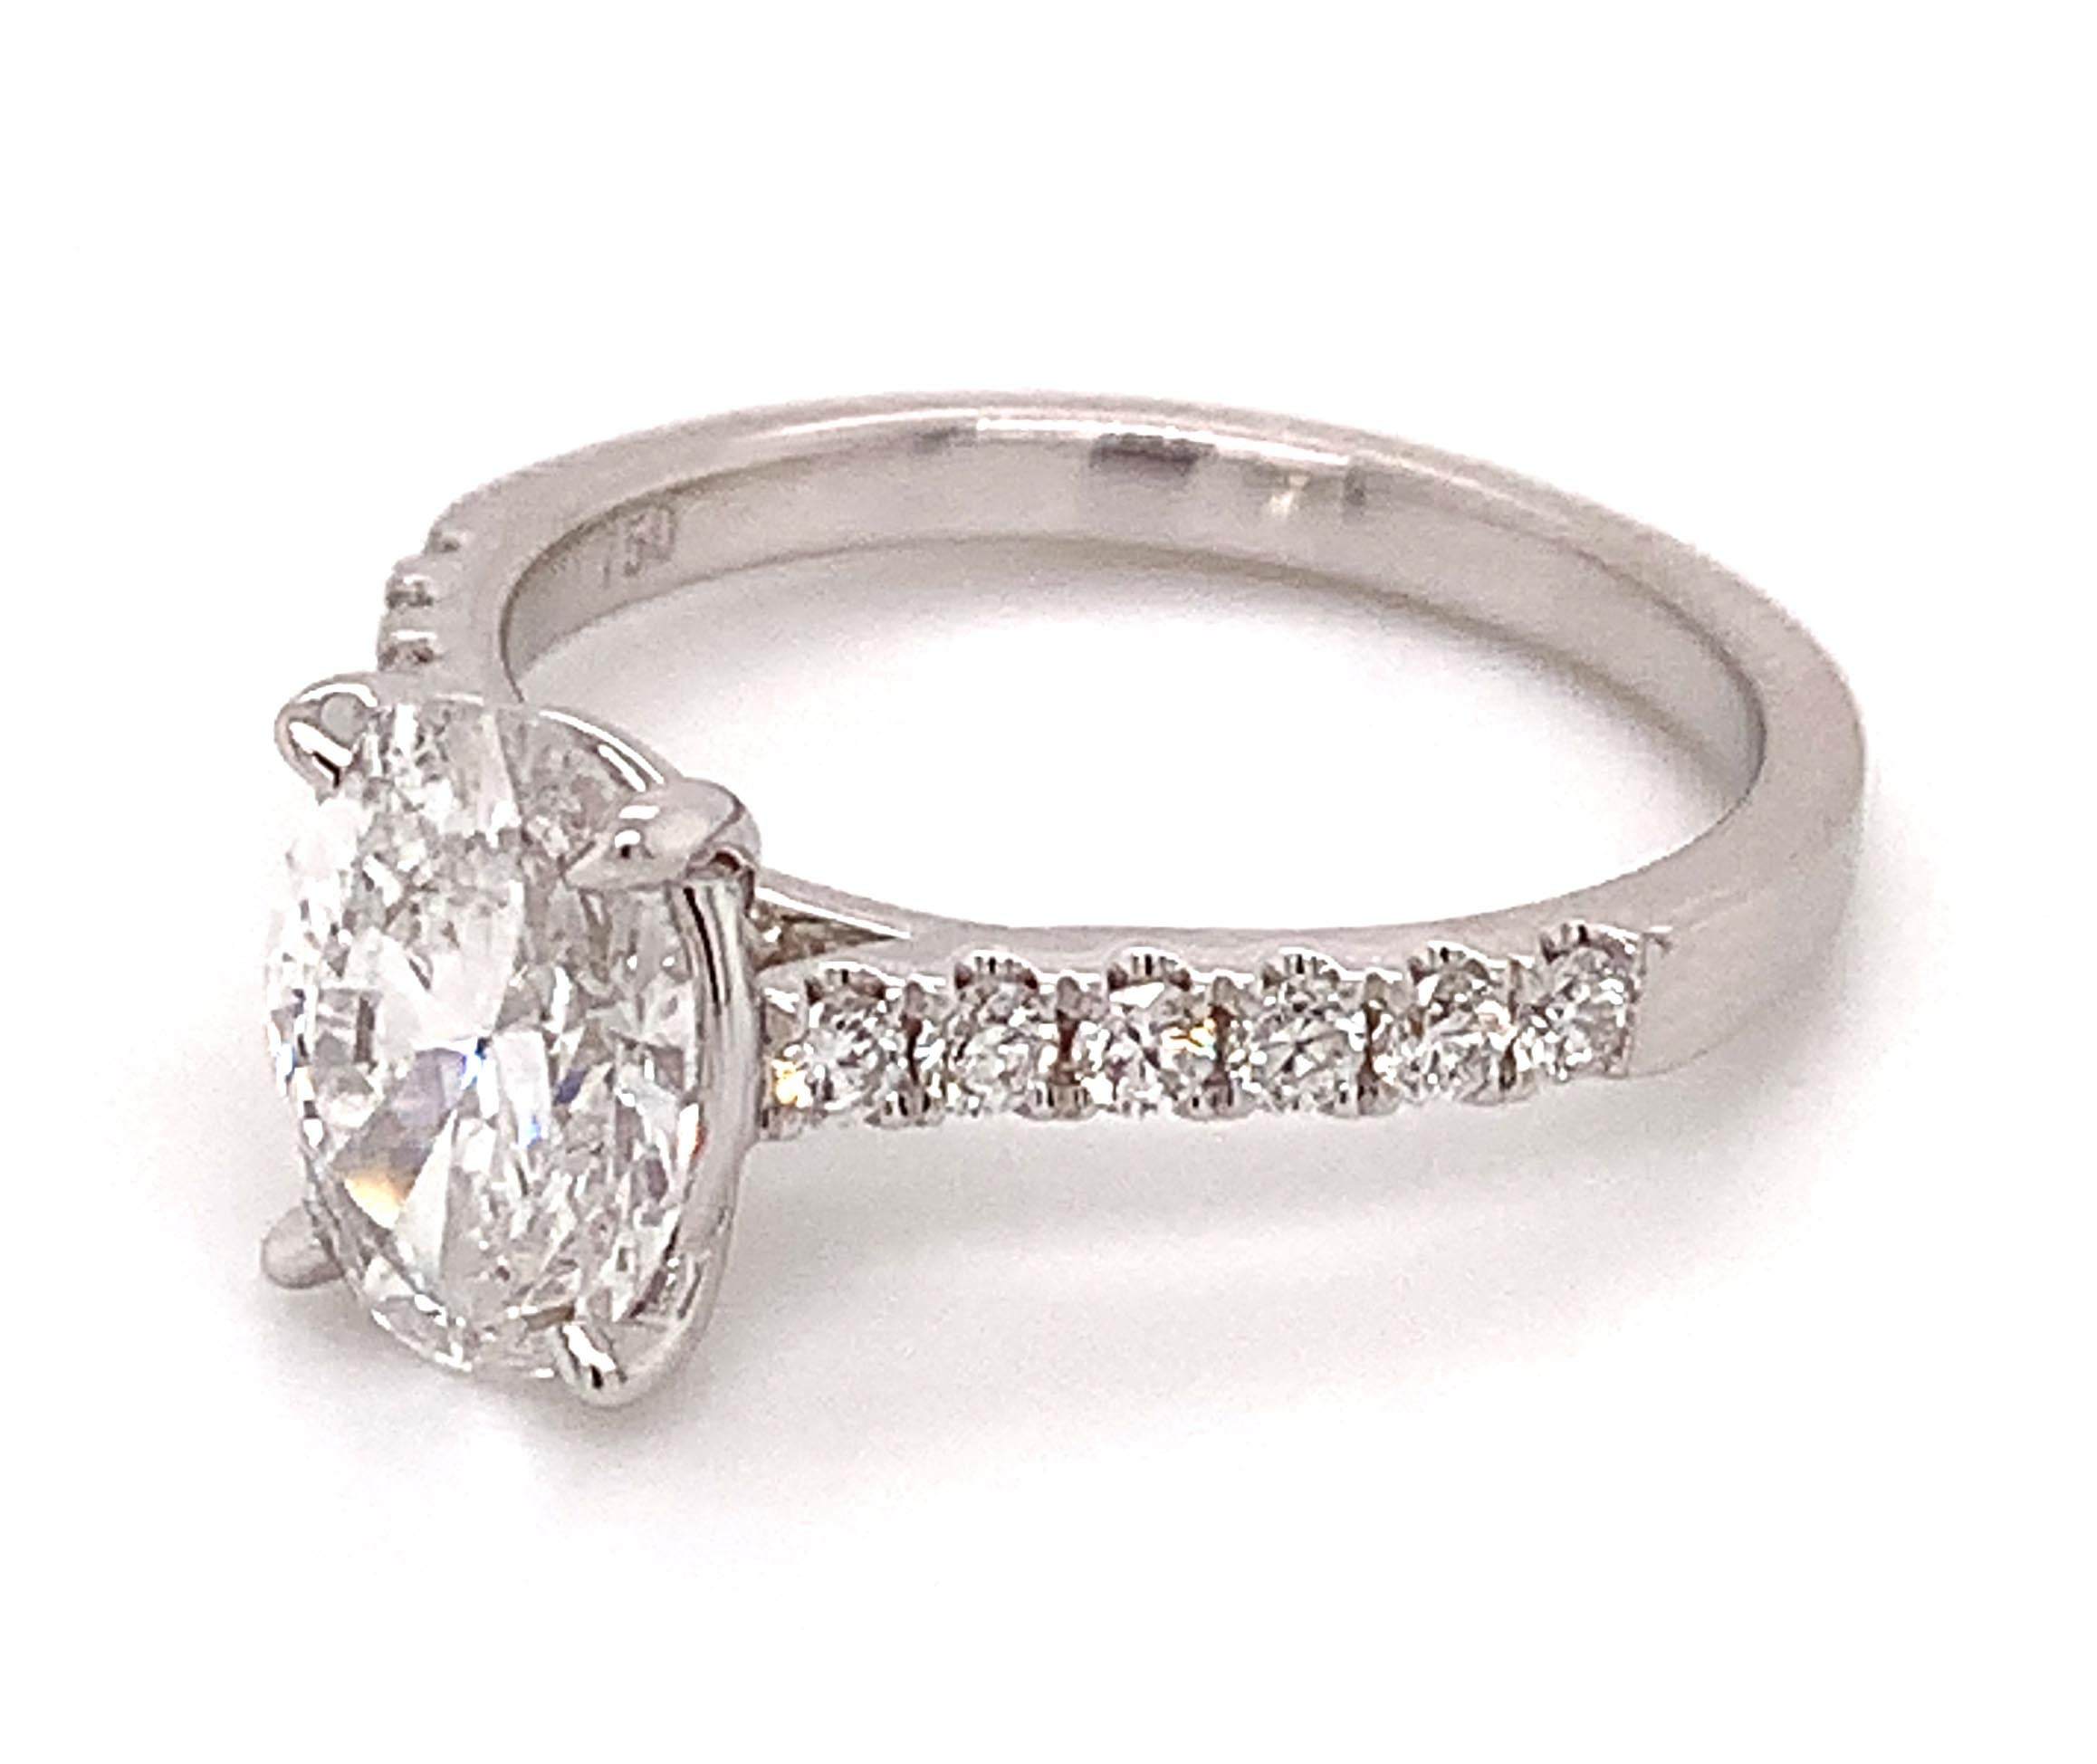 1.50ctw Oval Brilliant Cut Engagement Ring